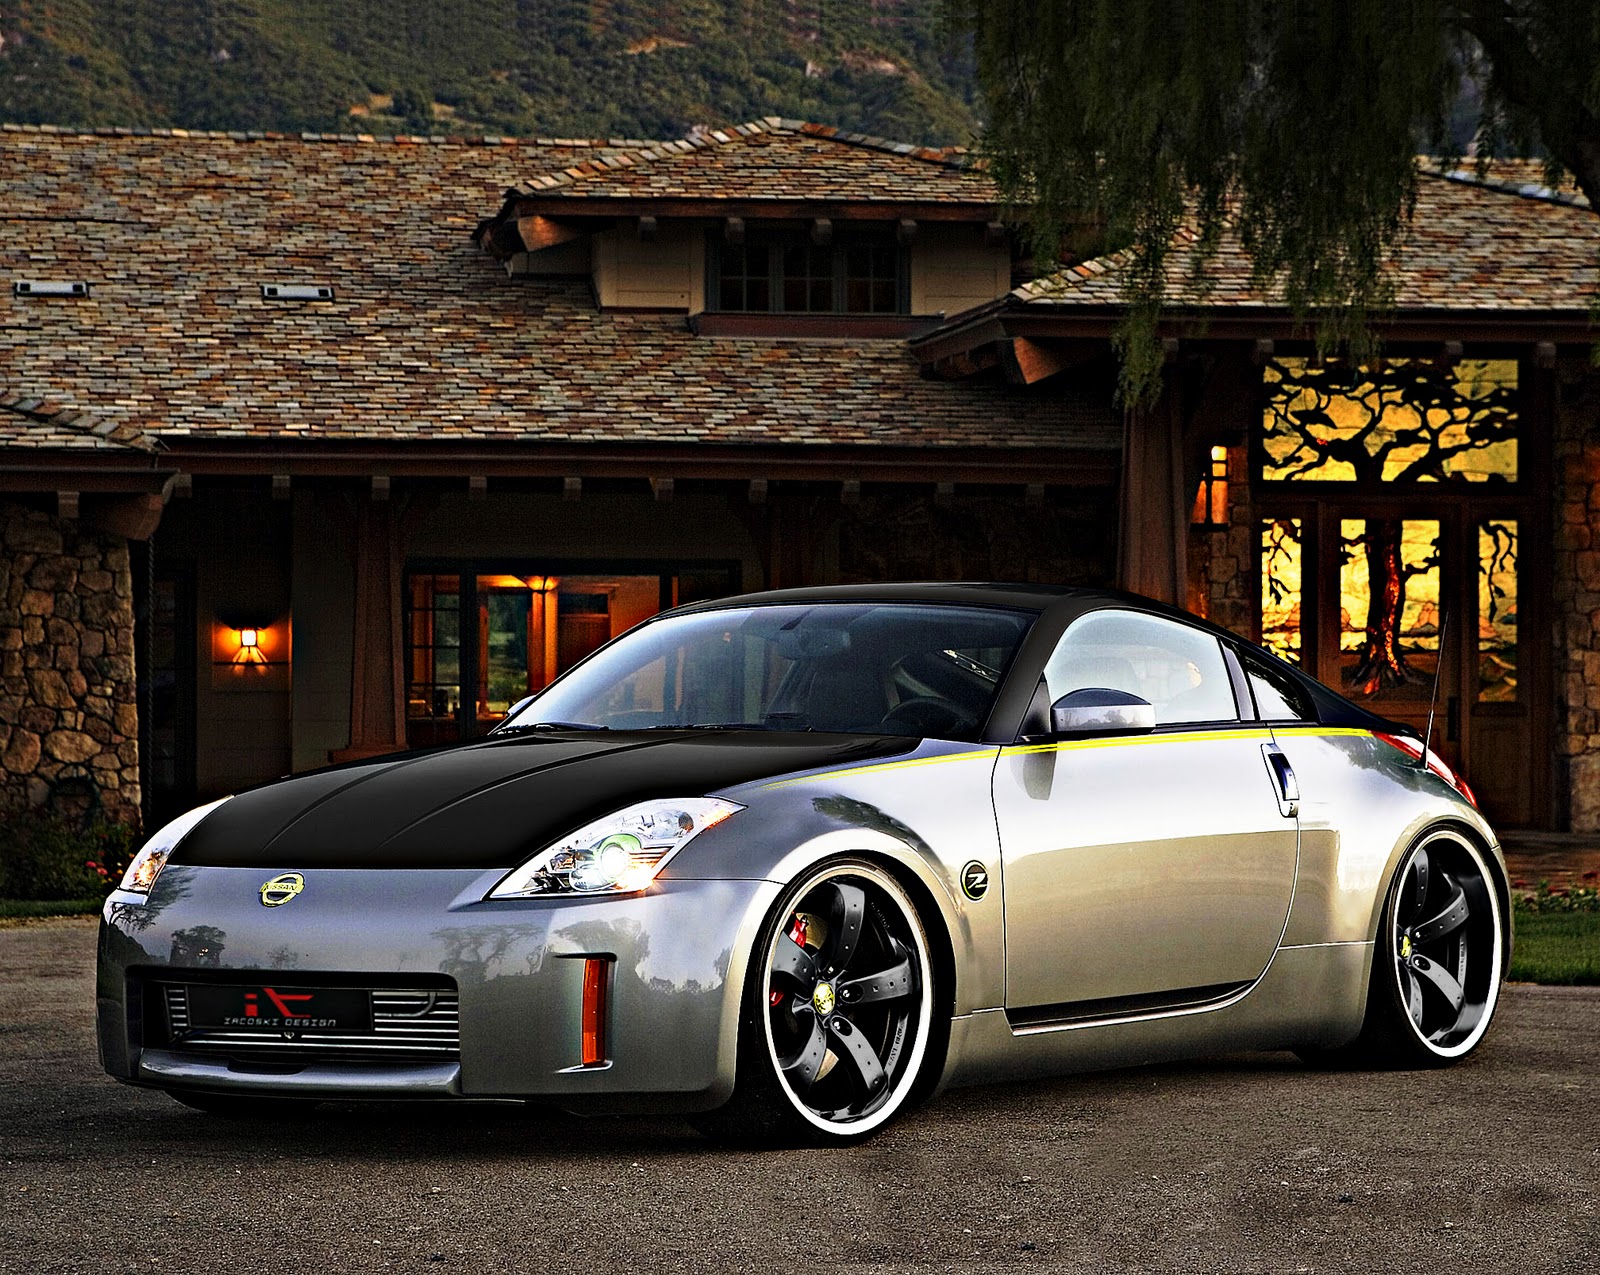  Cars HD Wallpapers Nissan 350Z Tuning HD Wallpapers 1600x1275